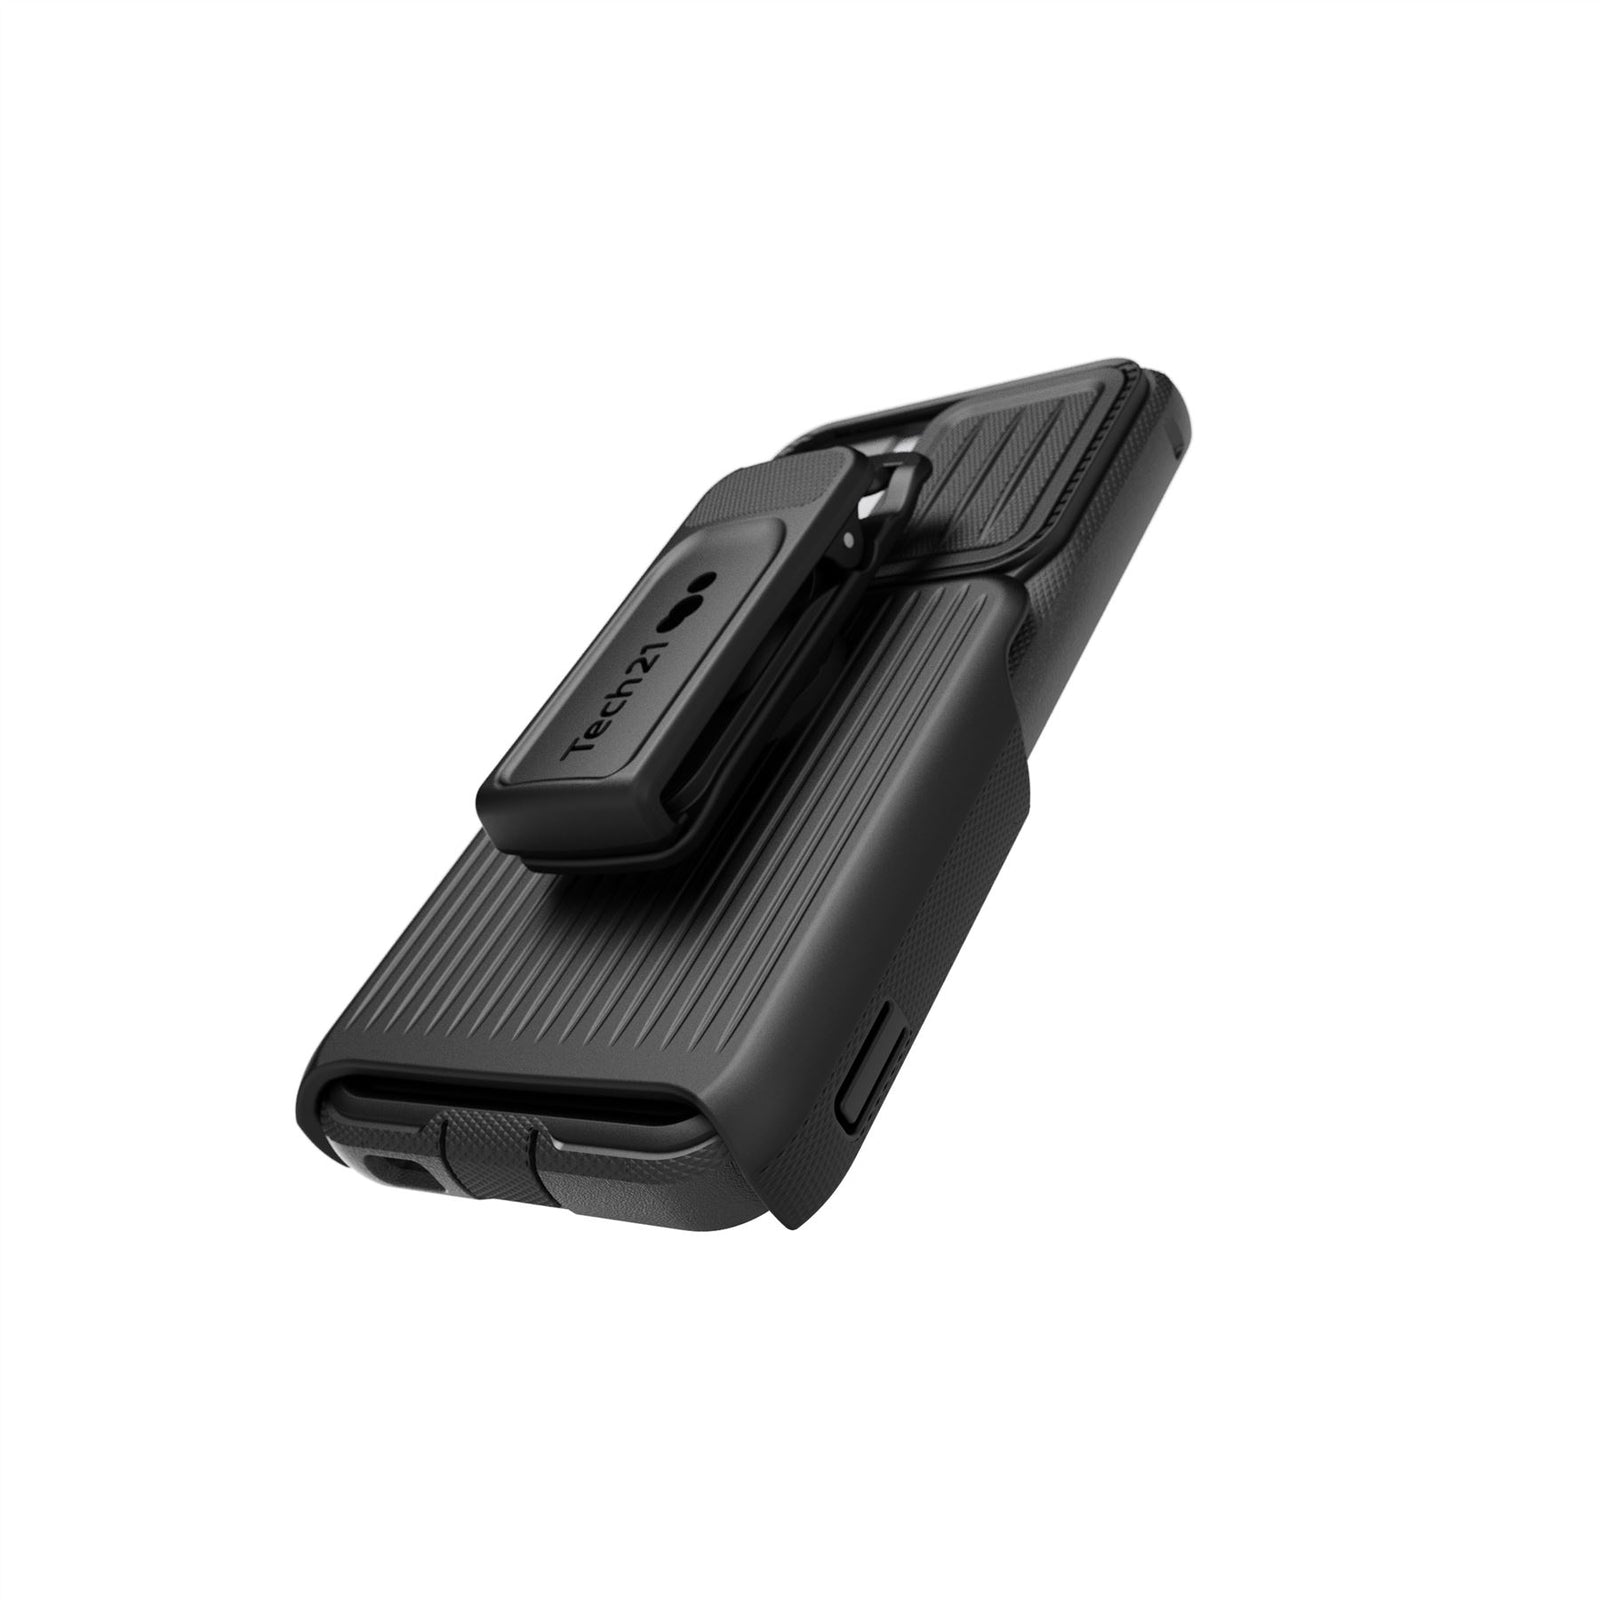 Evo Max - Samsung Galaxy S22 Case with Holster - Black